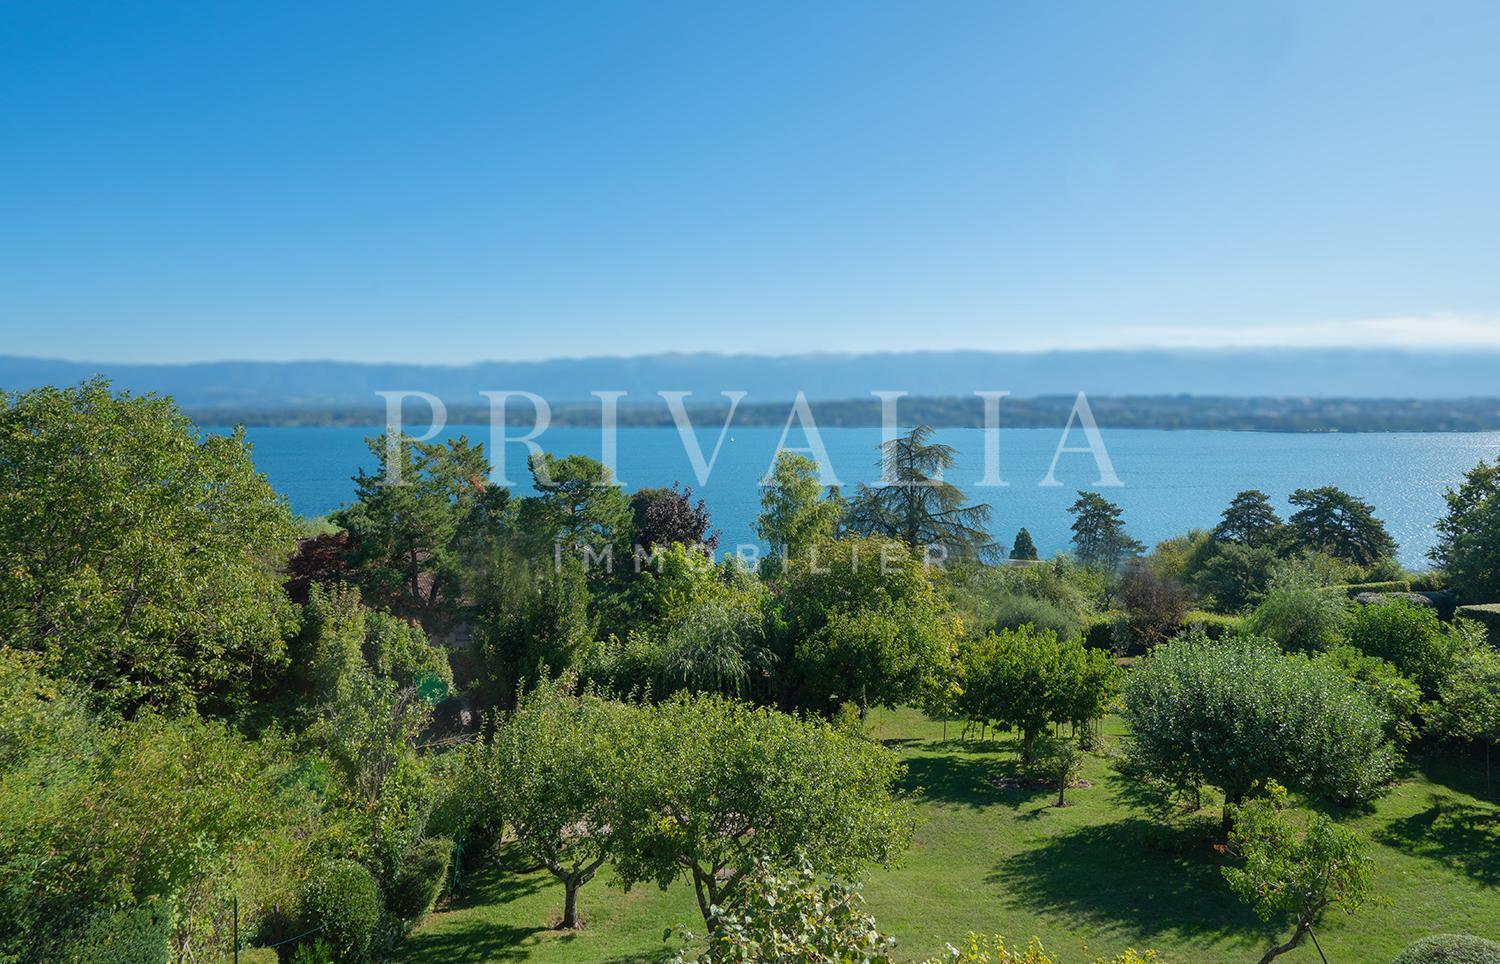 PrivaliaExclusive : Elegant property with panoramic view on the lake